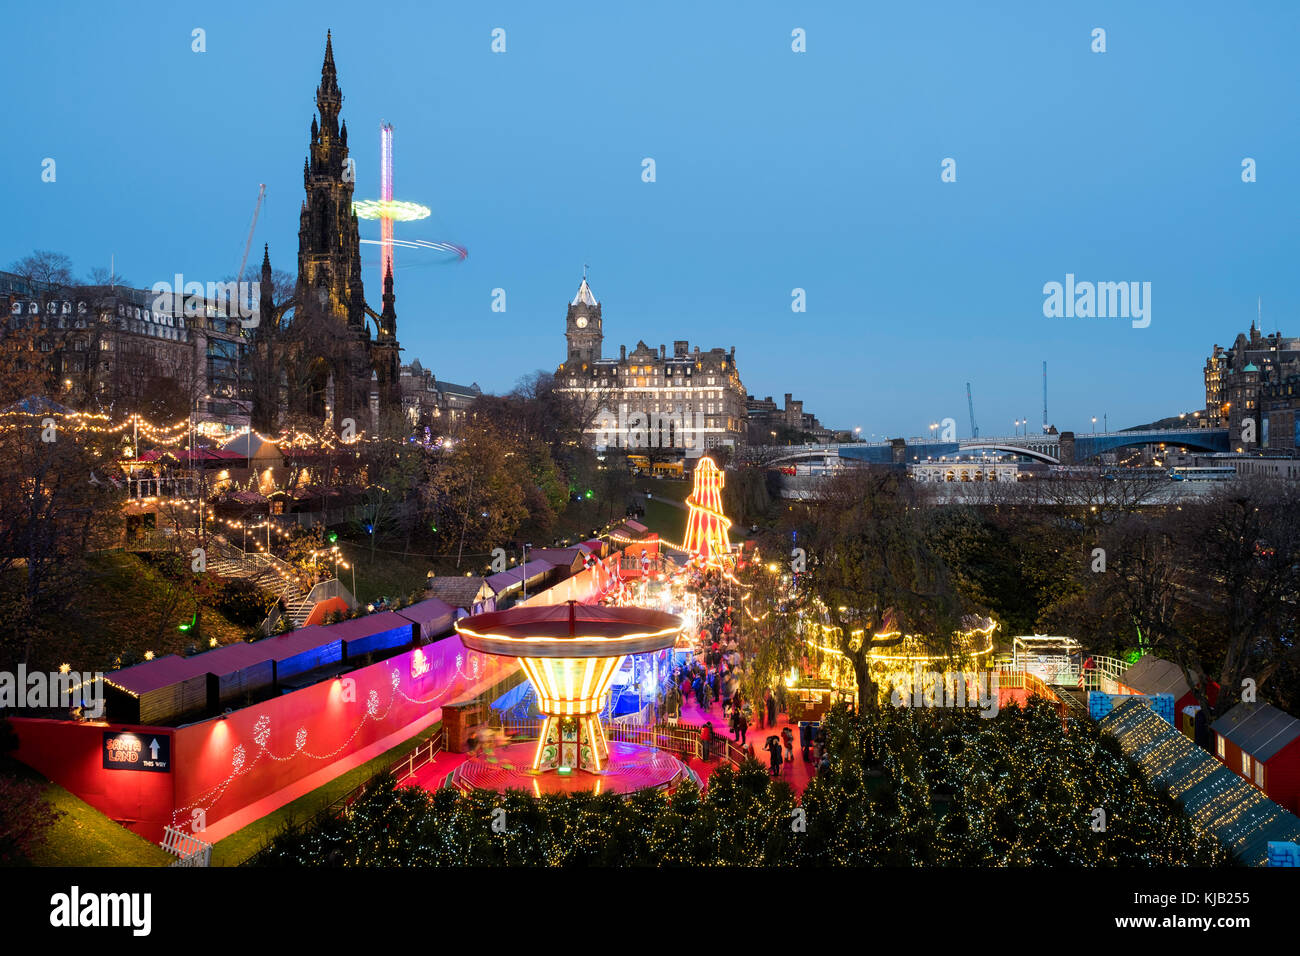 Opening day of Edinburgh's popular and beautiful Christmas market and funfair in Princes Street Gardens. Stock Photo